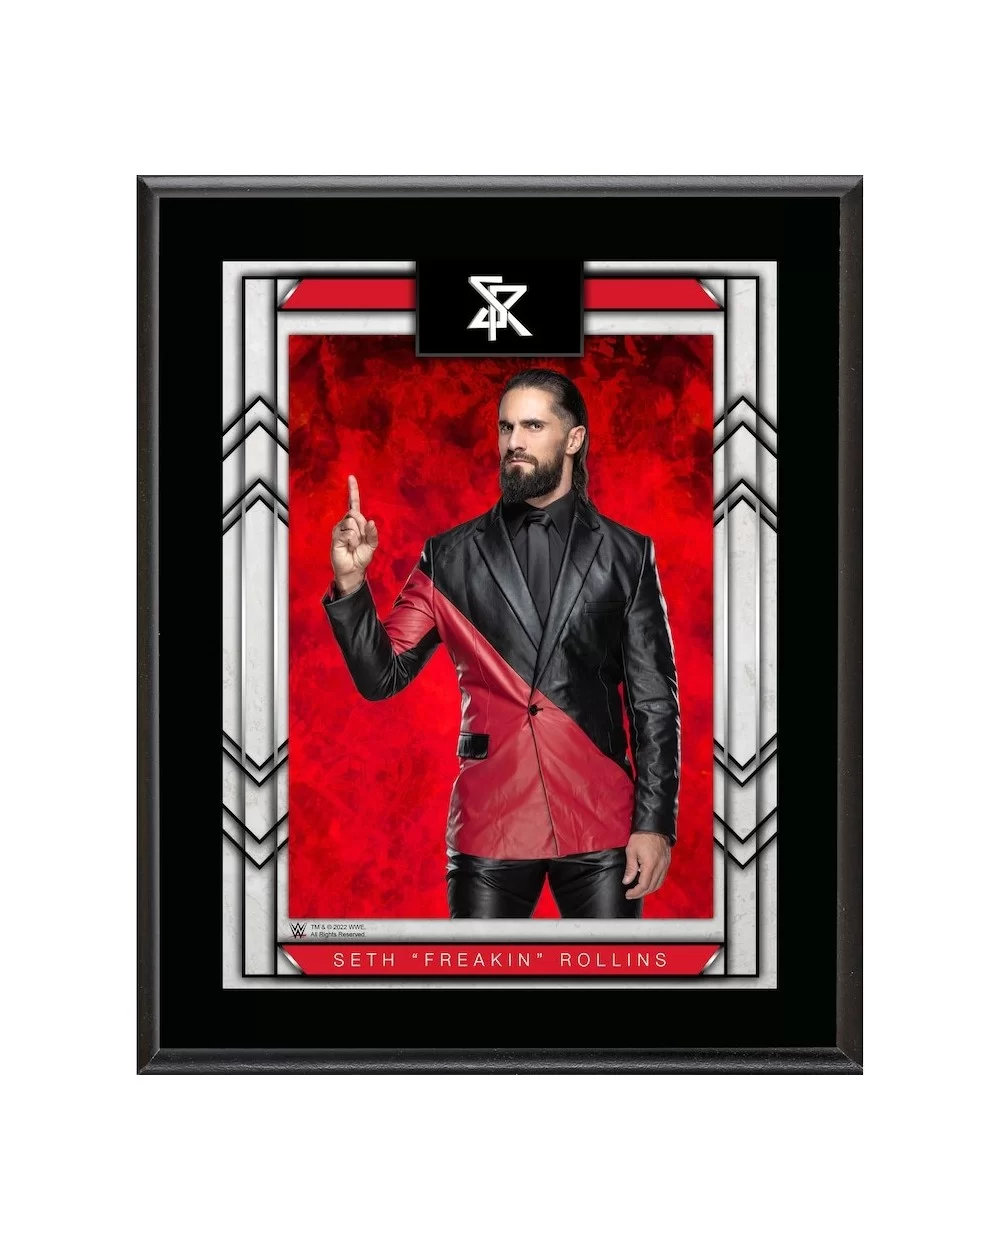 Seth "Freakin" Rollins 10.5" x 13" Sublimated Plaque $9.36 Collectibles